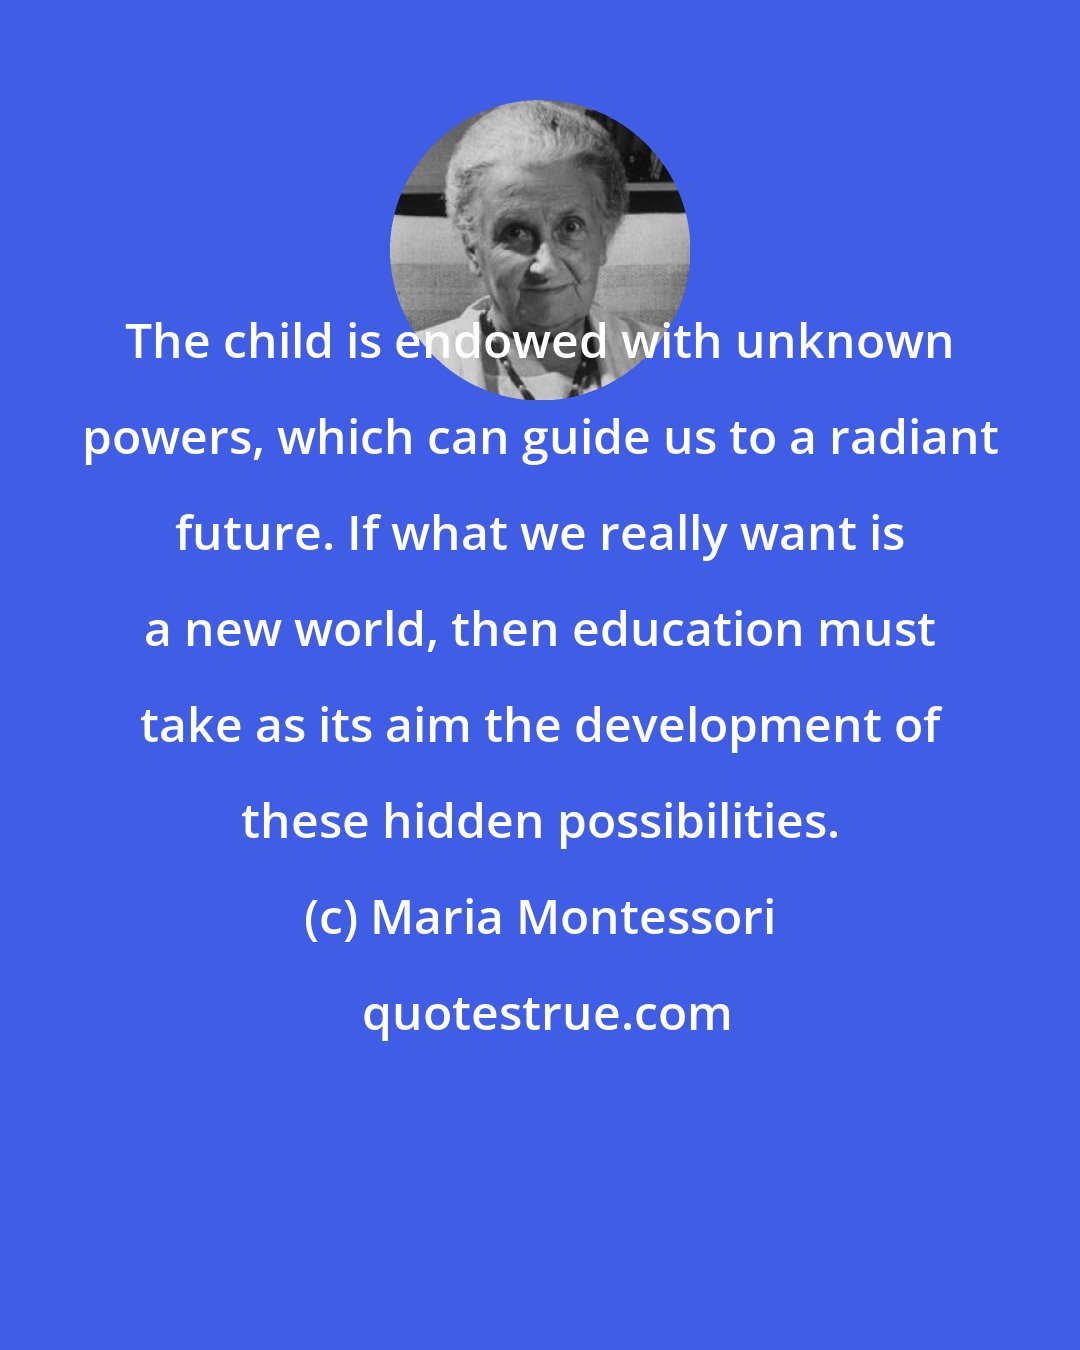 Maria Montessori: The child is endowed with unknown powers, which can guide us to a radiant future. If what we really want is a new world, then education must take as its aim the development of these hidden possibilities.